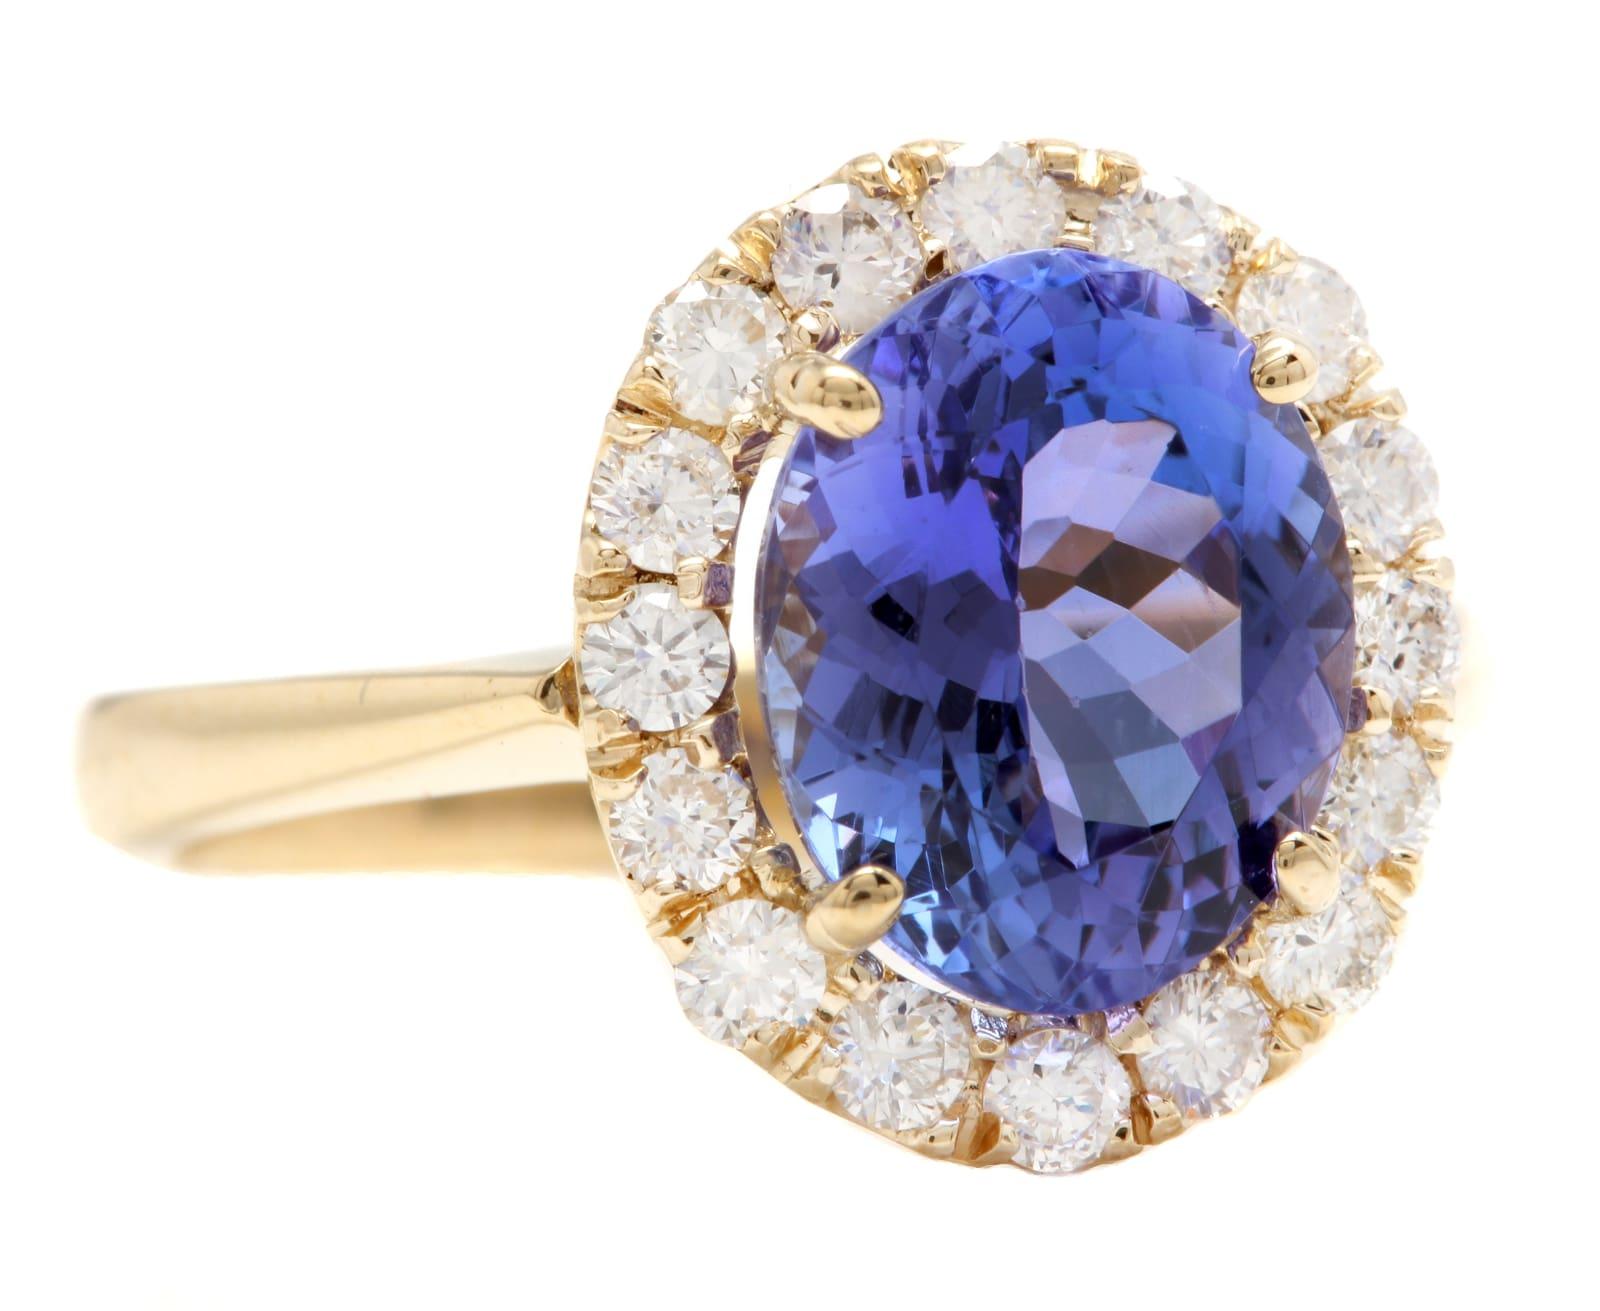 3.70 Carats Natural Very Nice Looking Tanzanite and Diamond 14K Solid Yellow Gold Ring

Suggested Replacement Value:  $6,000.00

Total Natural Oval Cut Tanzanite Weight is: Approx. 3.10 Carats 

Tanzanite Measures: Approx. 10.00 x 8.00mm
 
Natural